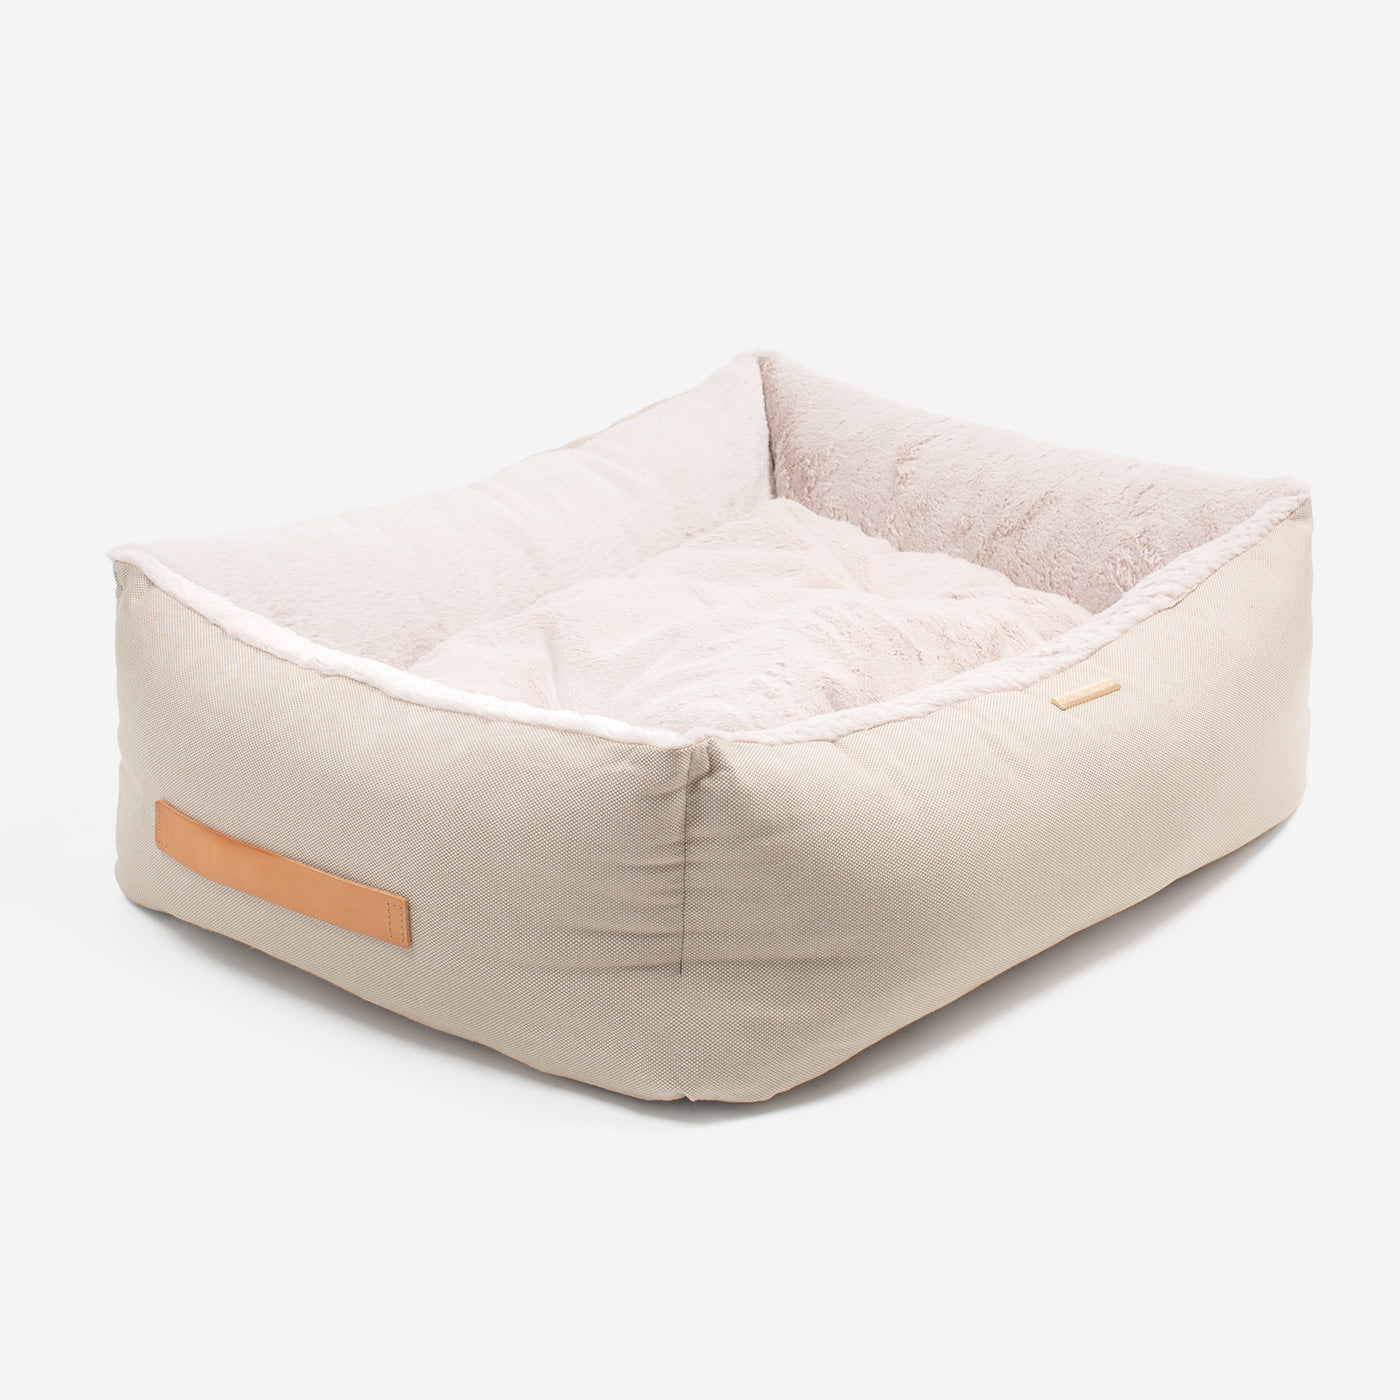 Discover This Luxurious Box Bed For Dogs, Made Using Beautiful Twill Fabric To Craft The Perfect Dog Box Bed! In Stunning Cream Linen, Available Now at Lords & Labradors US